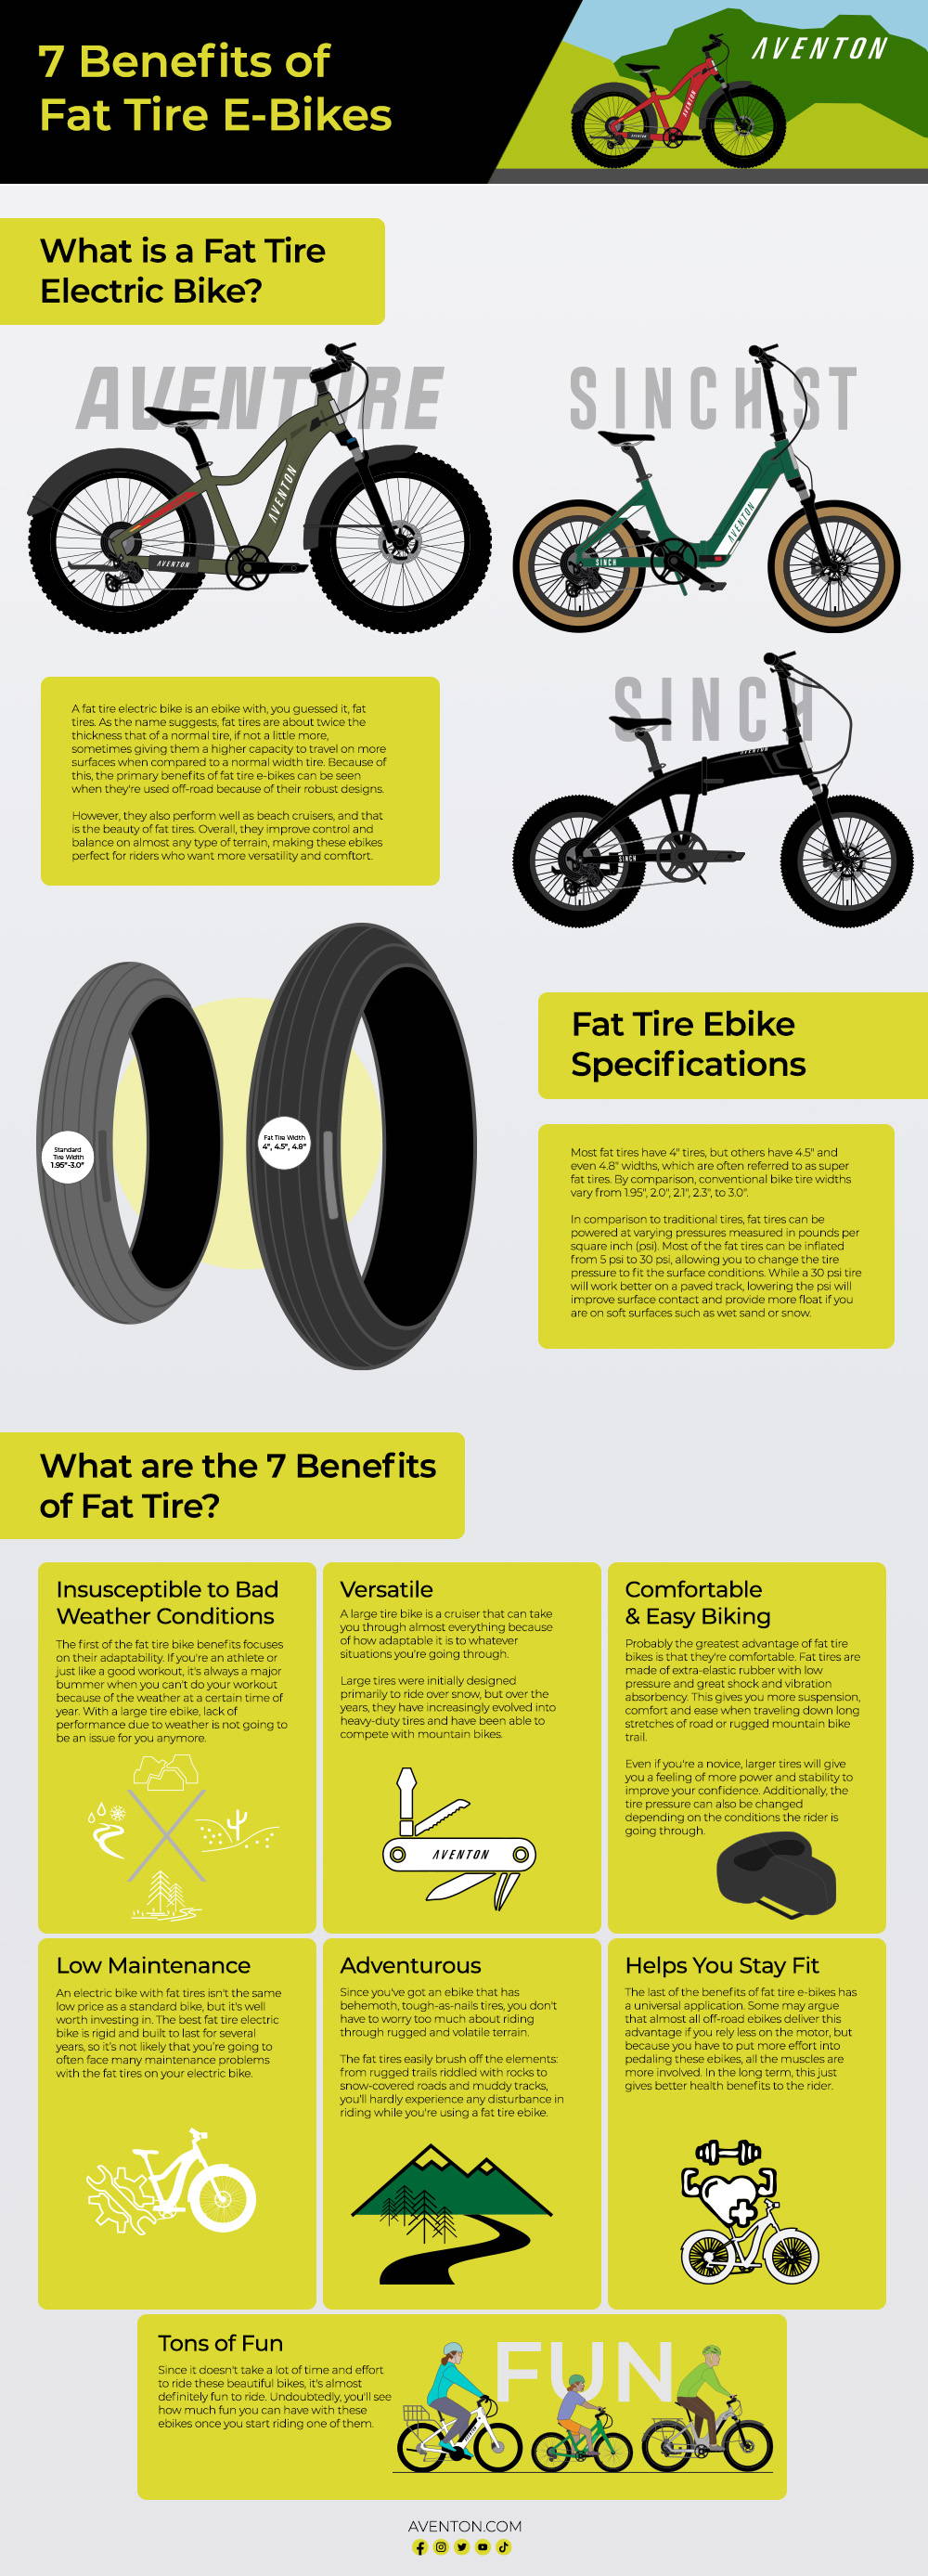 An explanation of what makes fat tire ebikes and 7 benefits including versatility, easy biking, health, and adventure.